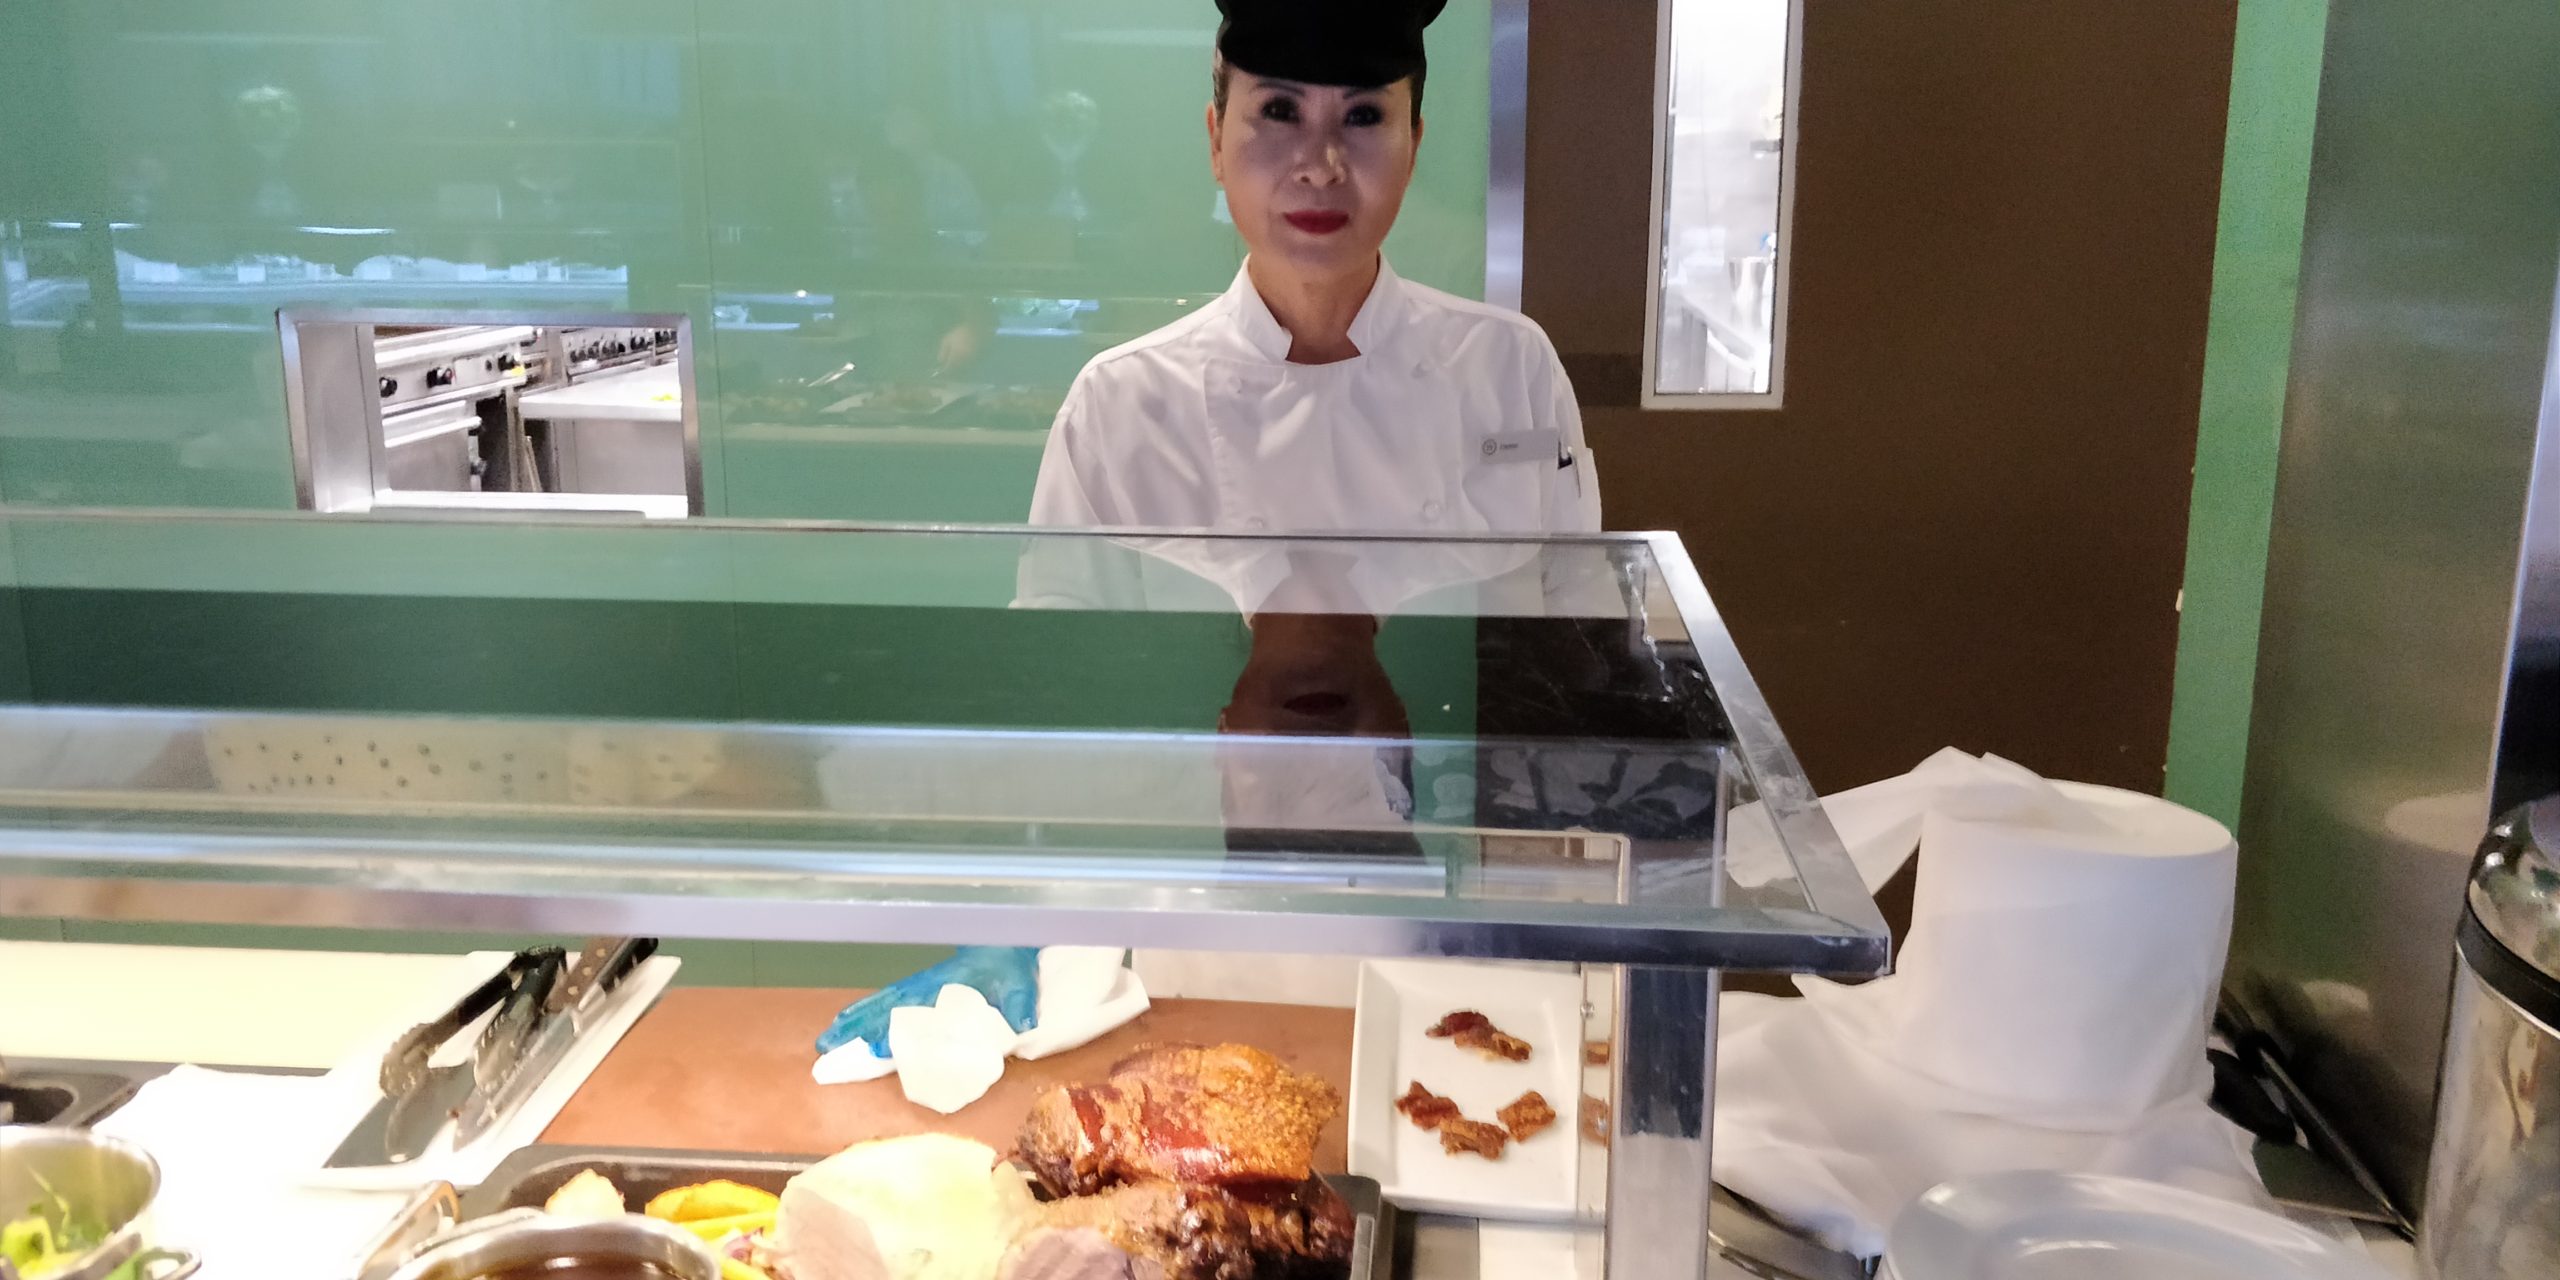 Review the Grand Mirage Resort picture of the cook who slices the meat for you